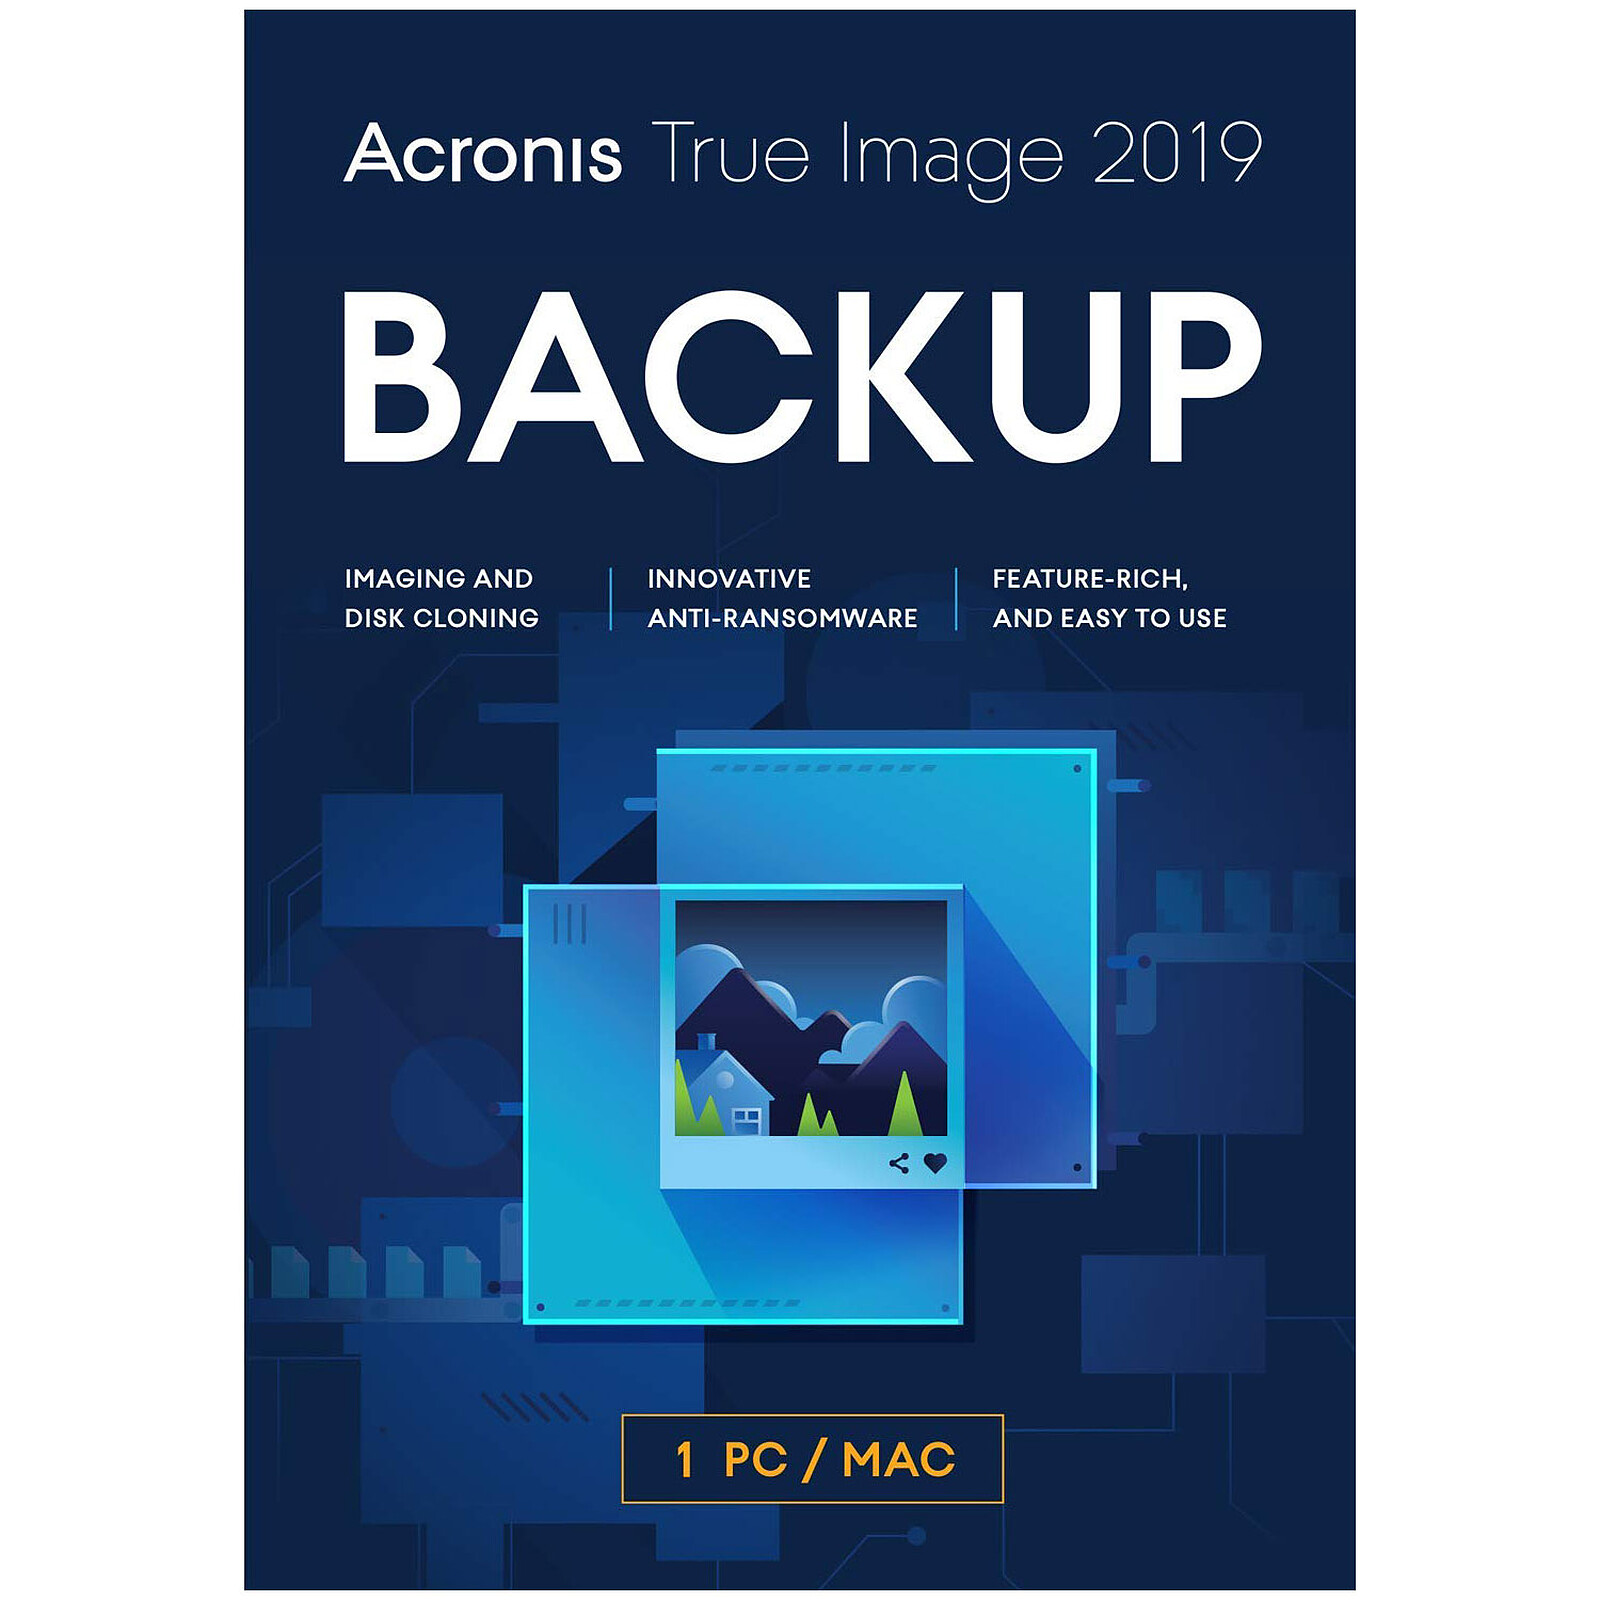 Acronis true image 2019 for crucial access is denied for acronis true image files when deleting